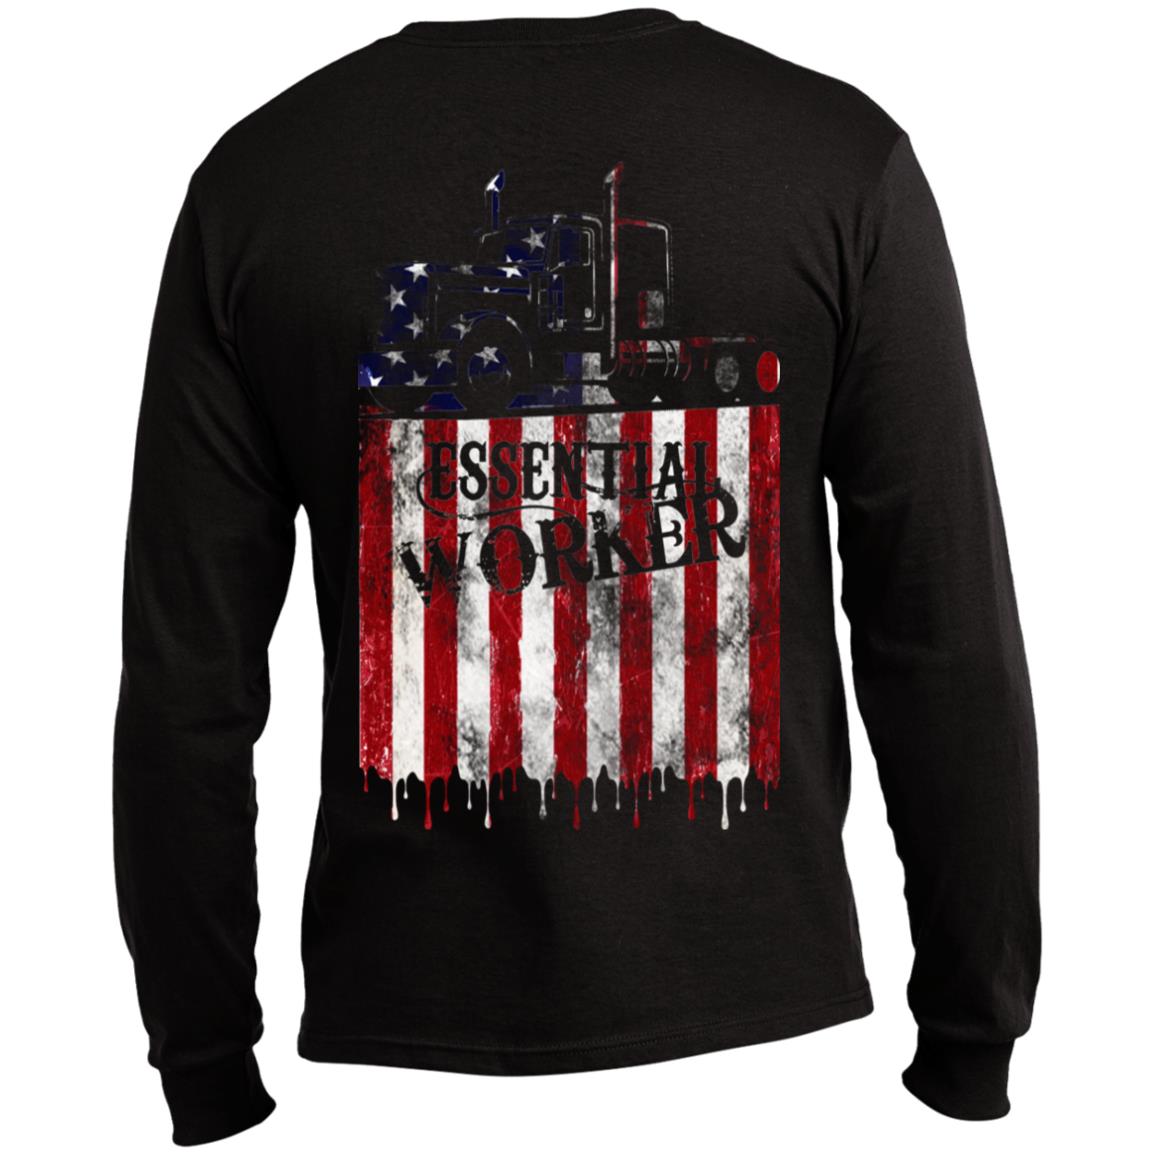 Essential Worker Long Sleeve Made in the US T-Shirt